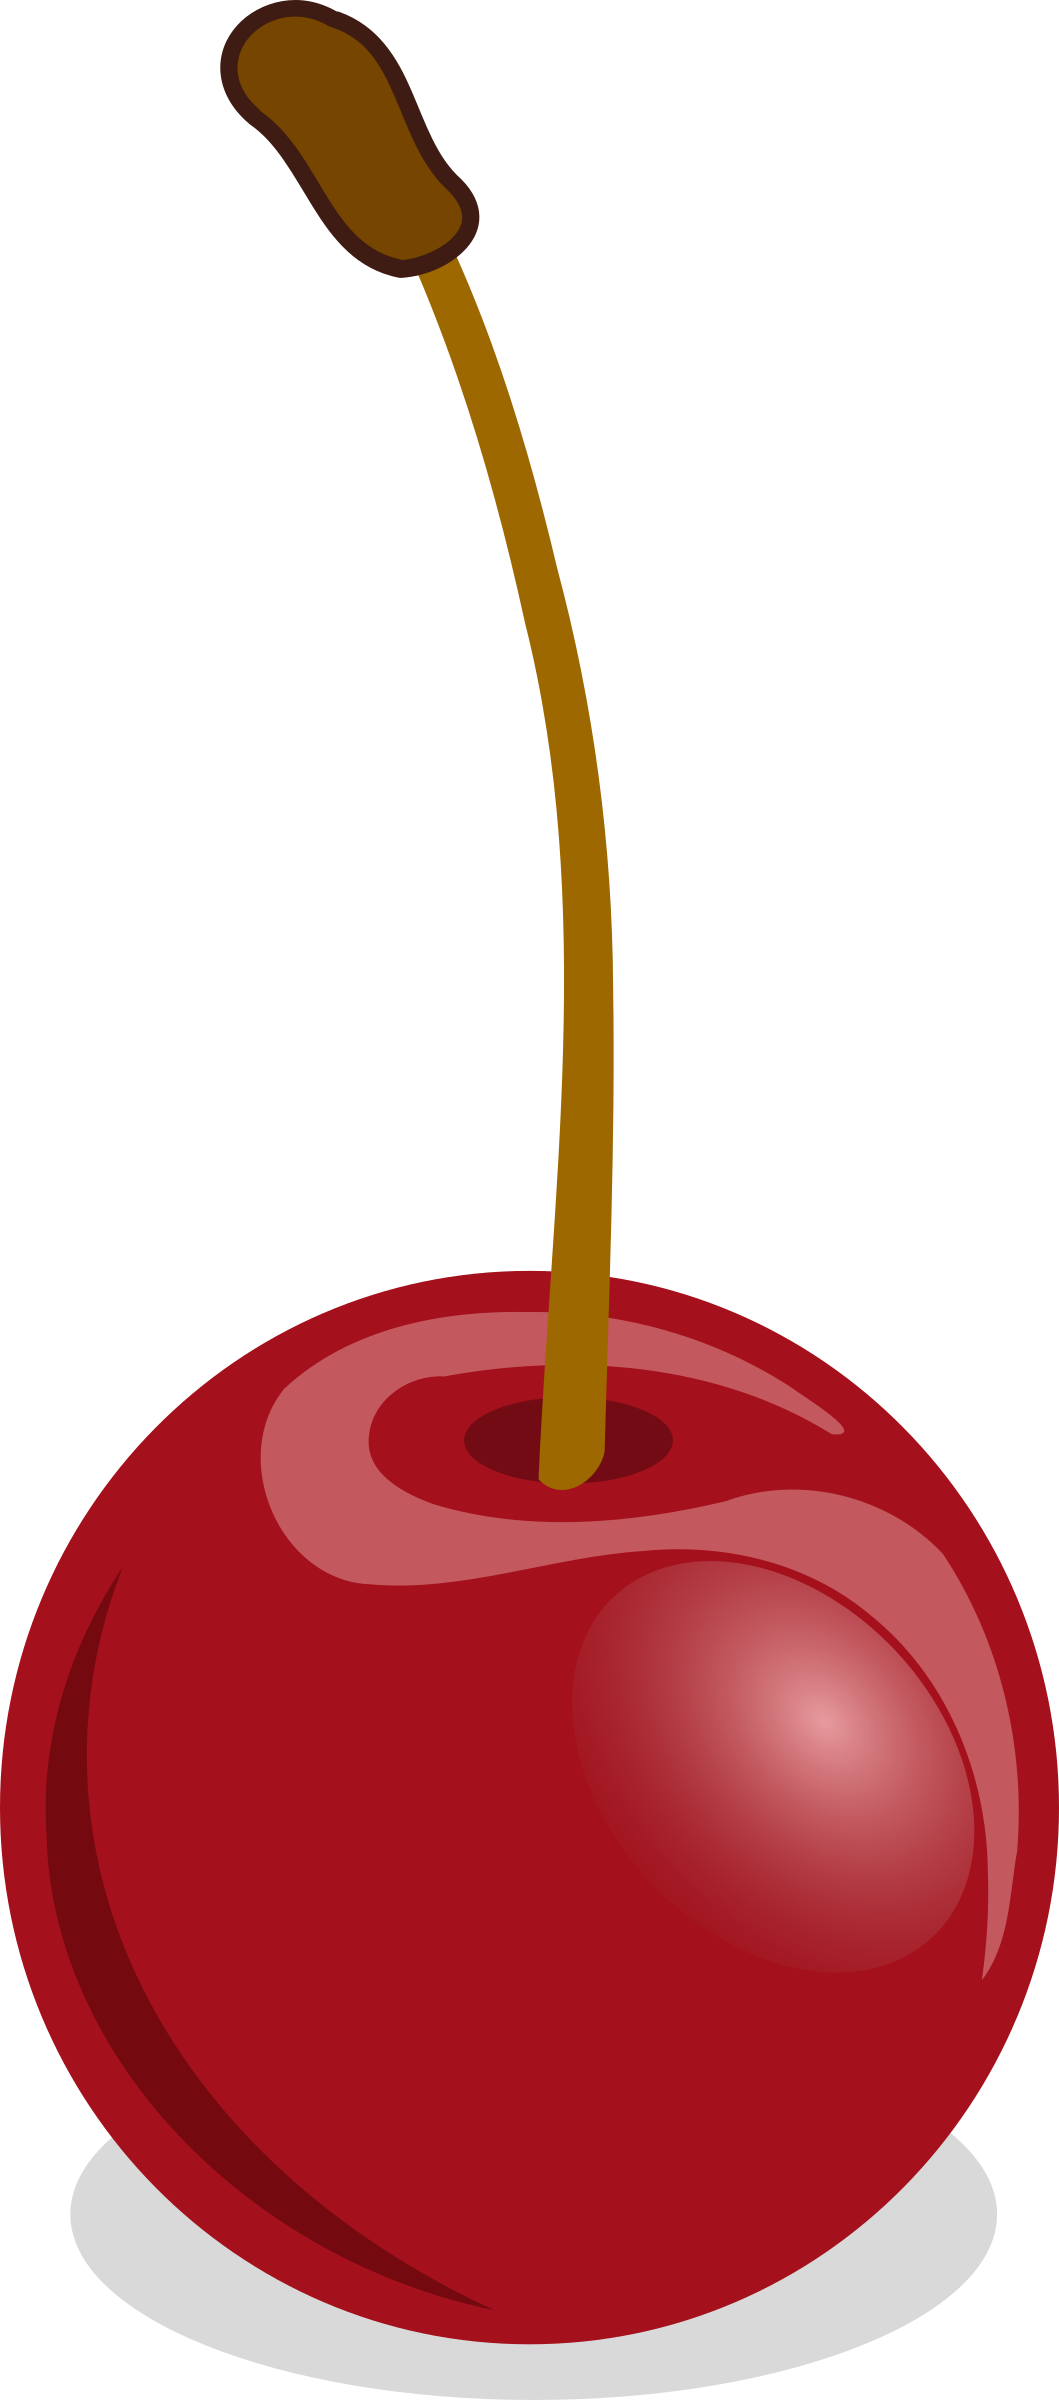 A Shiny, Delicious-looking Cherry - Cherry Clip Art (1059x2400)